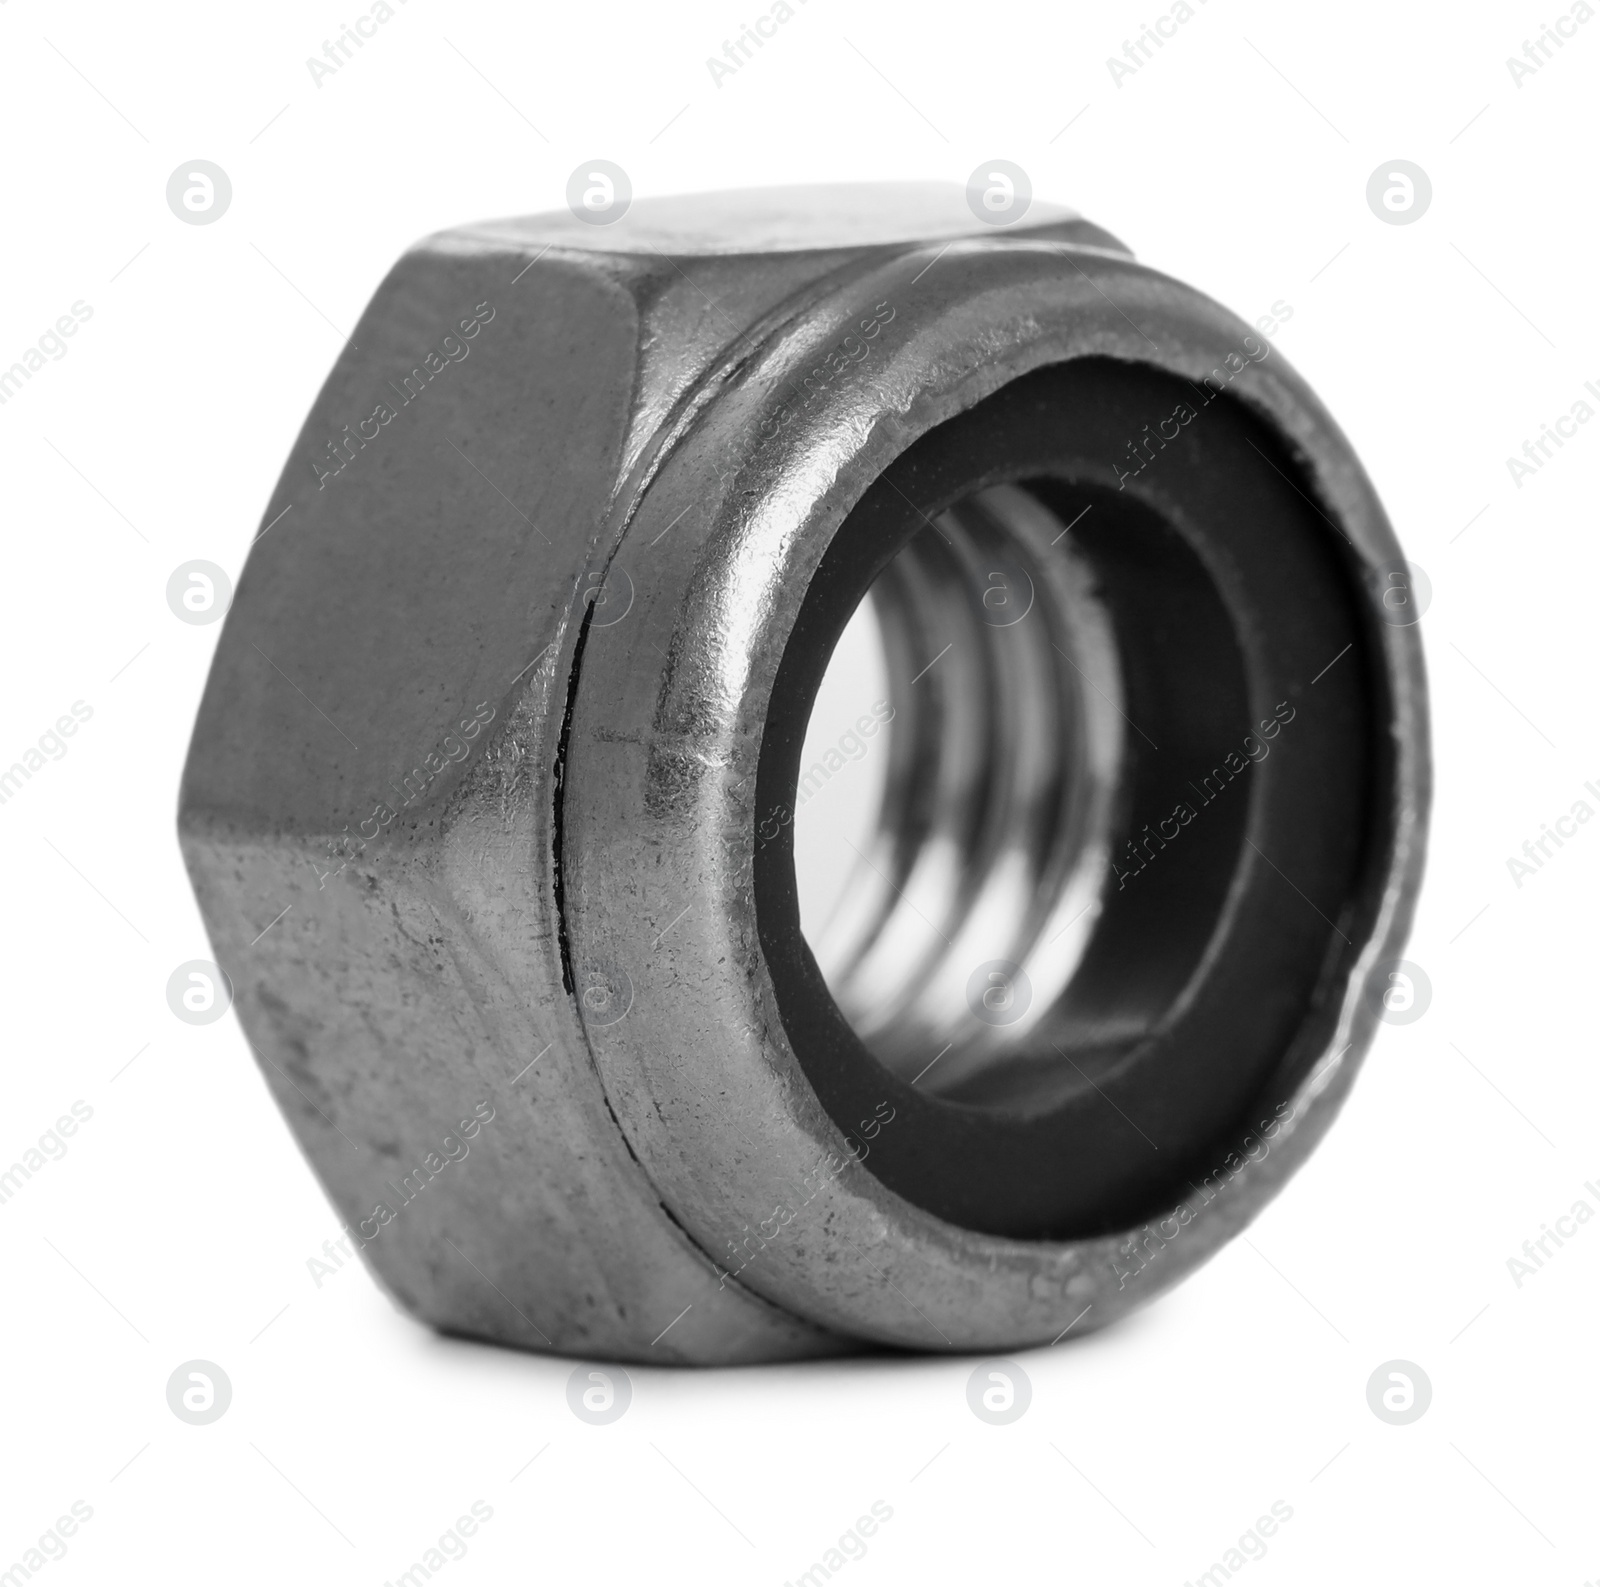 Photo of One metal lock nut isolated on white